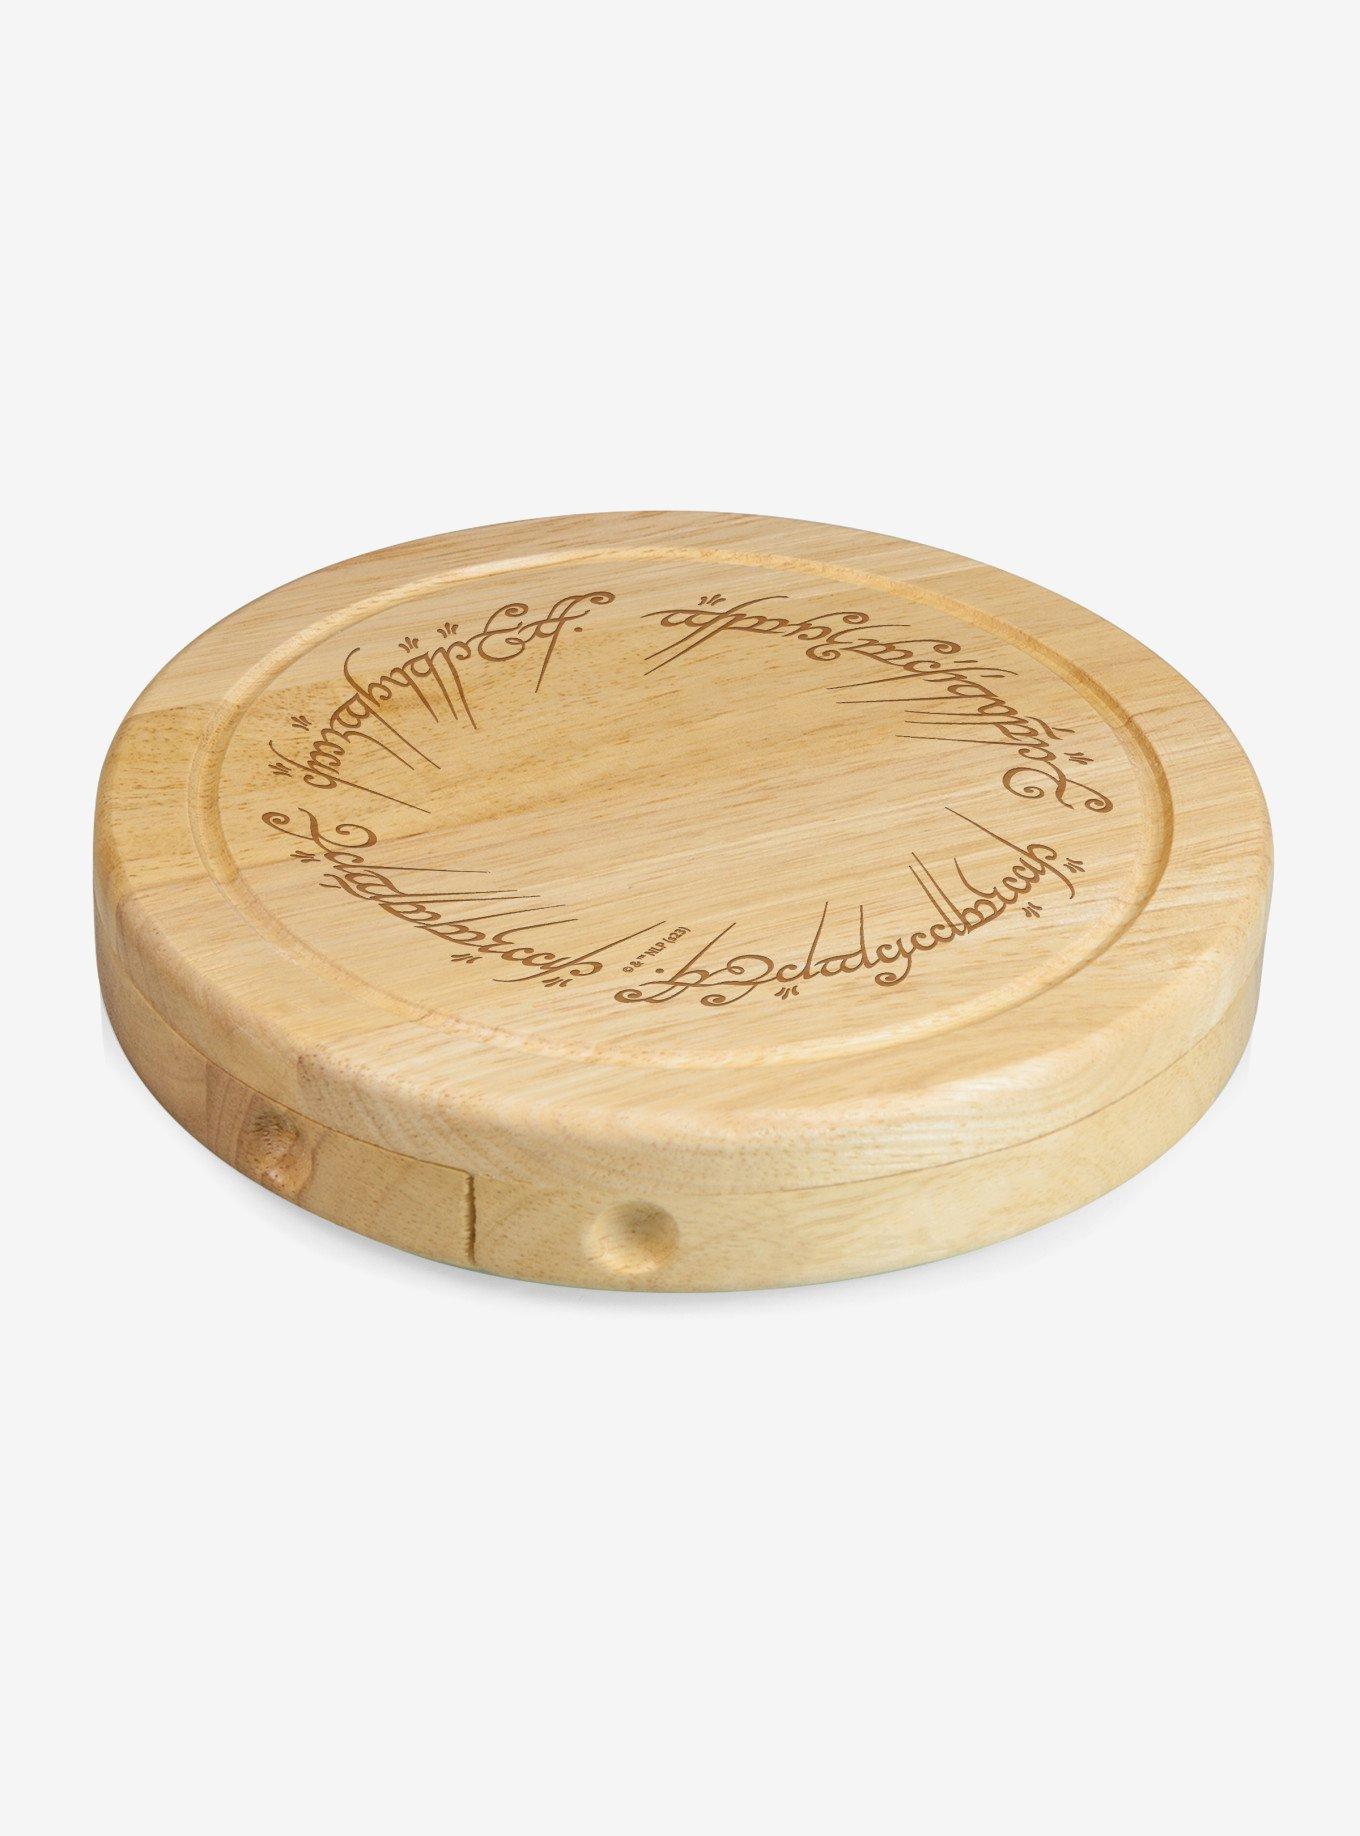 Lord of the Rings Brie Cheese Cutting Board & Tools Set